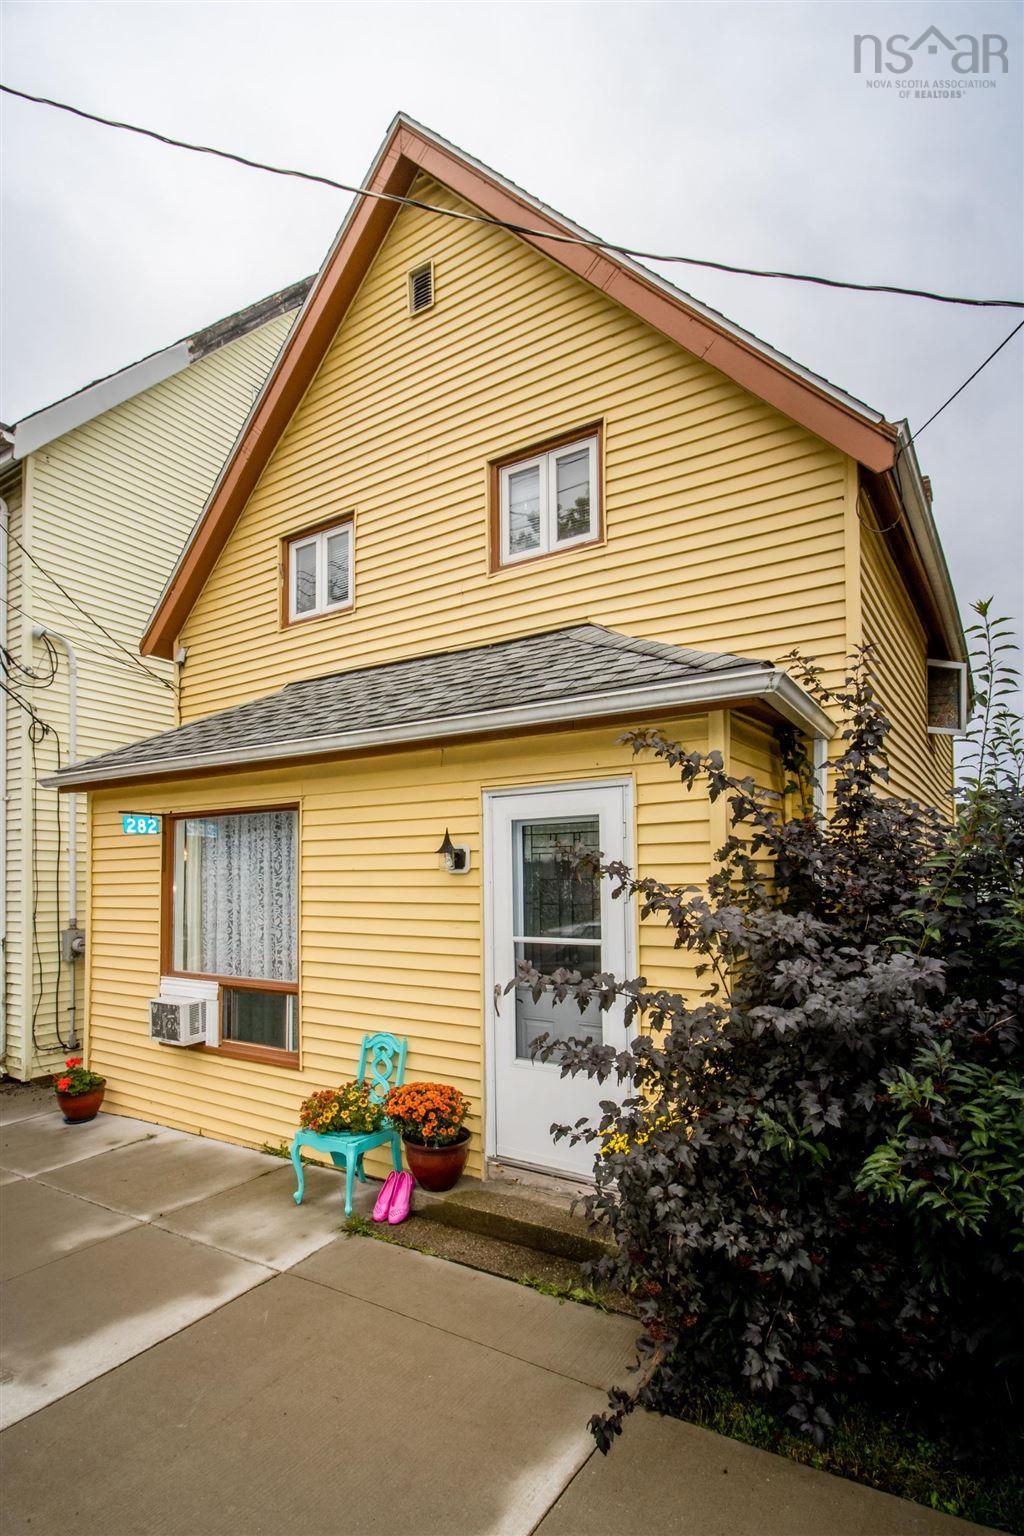 I have sold a property at 282 Gerrish Street in Windsor
